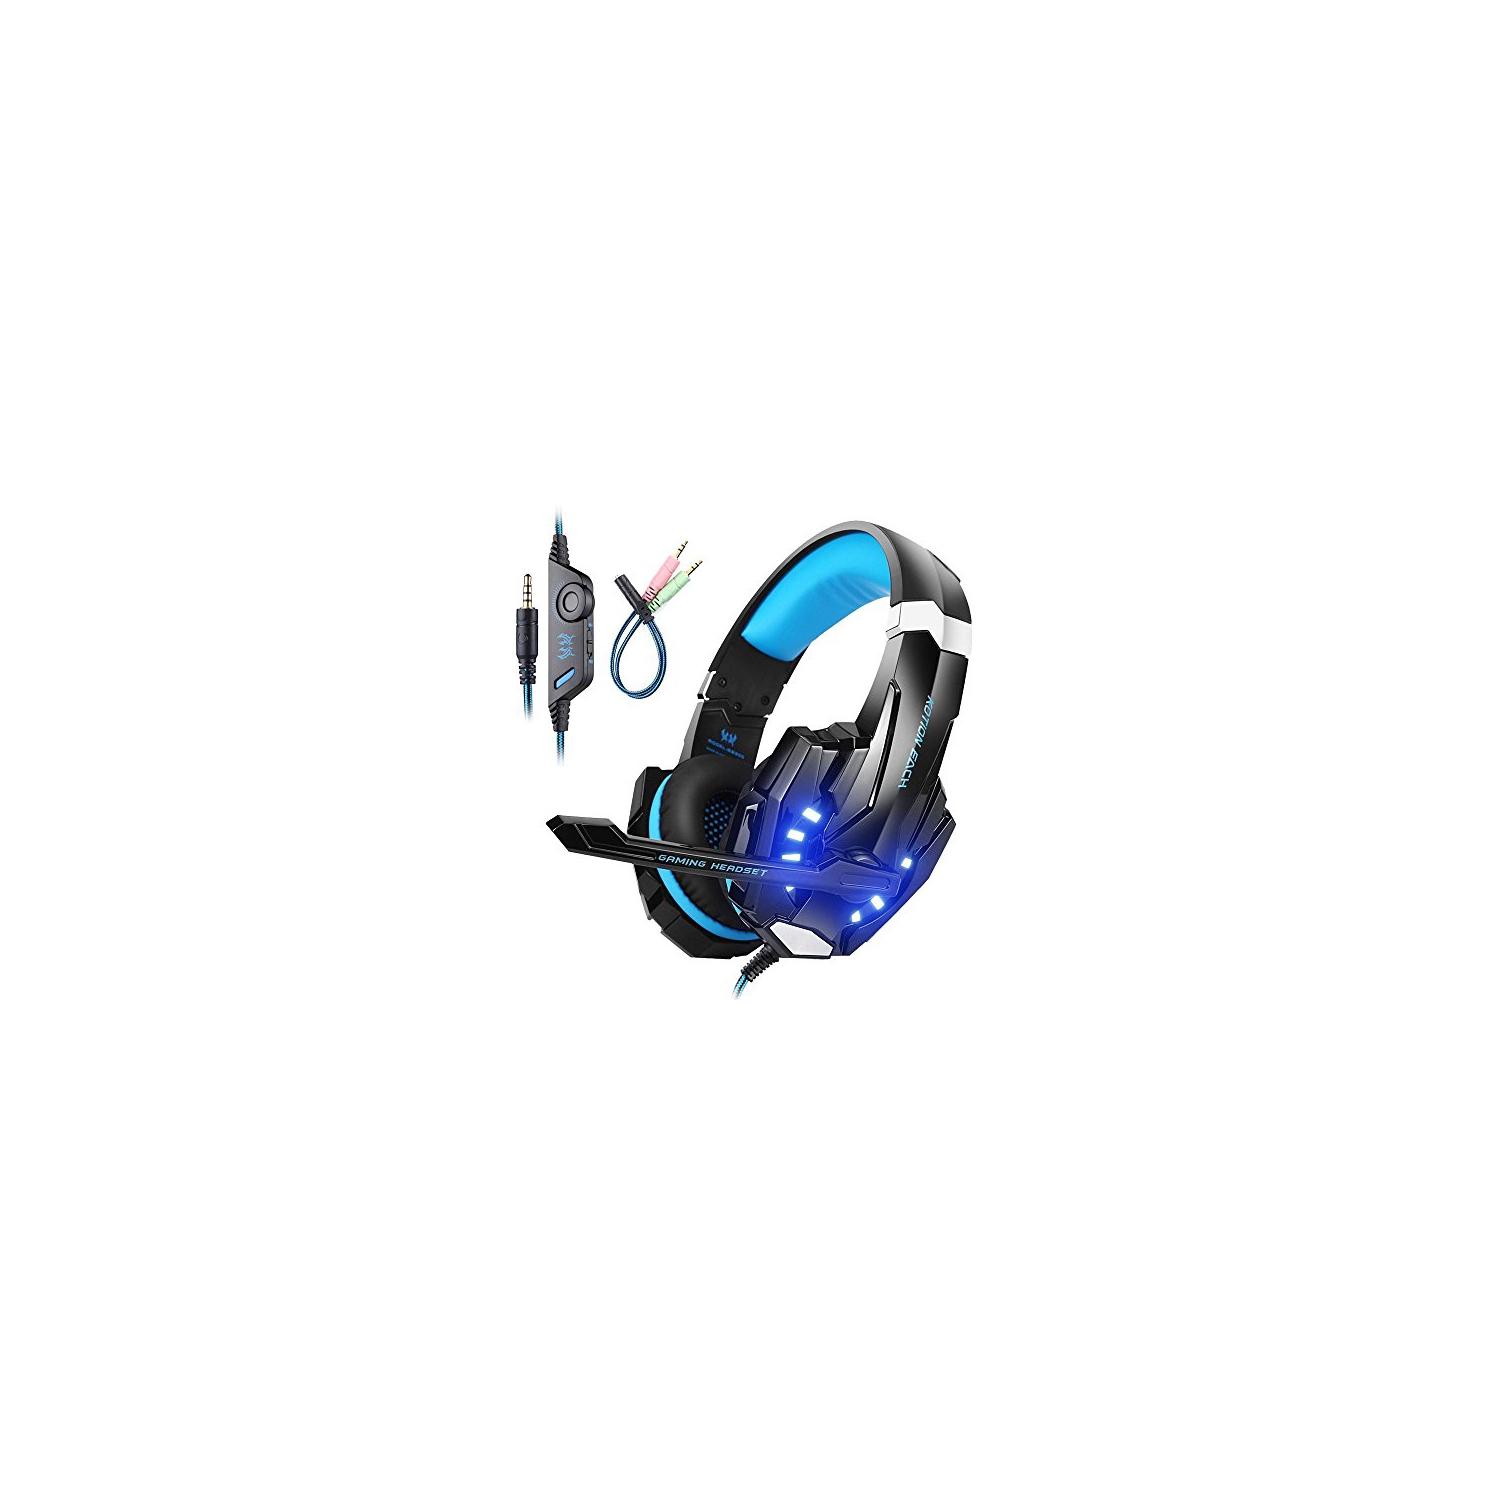 Mengshen Gaming Headset for PS4/Xbox one/Xbox One S/PC/Mac/Laptop/Cell Phone - Gaming Headphone with Mic, LED Light,